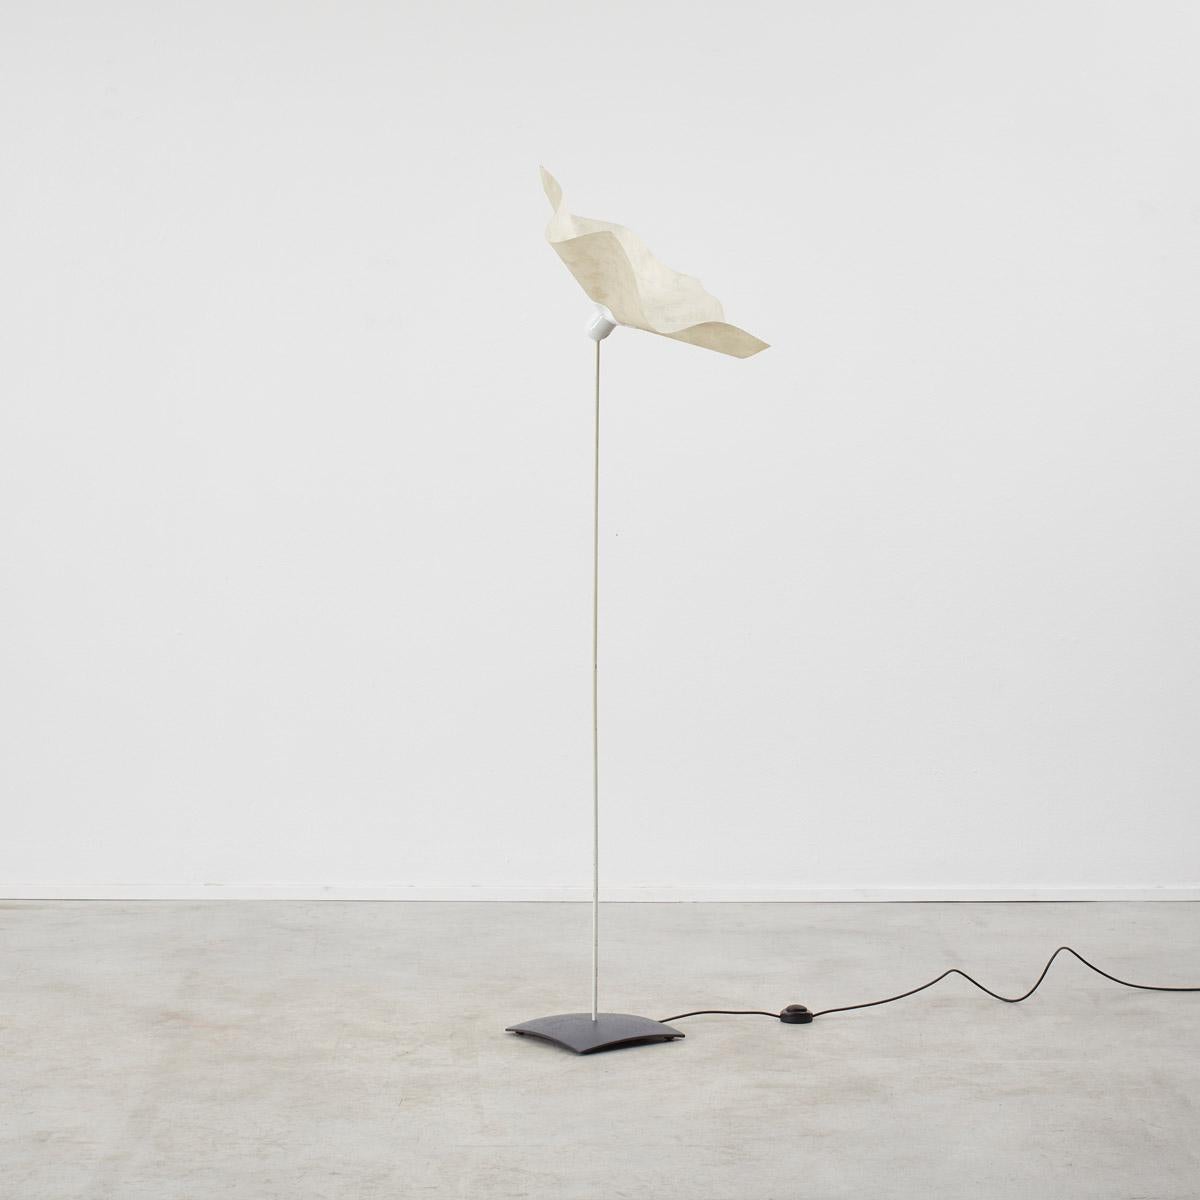 Italian architect Mario Bellini (1935-) is well known for creating powerful, thoughtful and creative pieces of design. The long sleek stem of the Area floor lamps supports a ruffled shade, reflecting that of a flower in bloom. The head and shade of